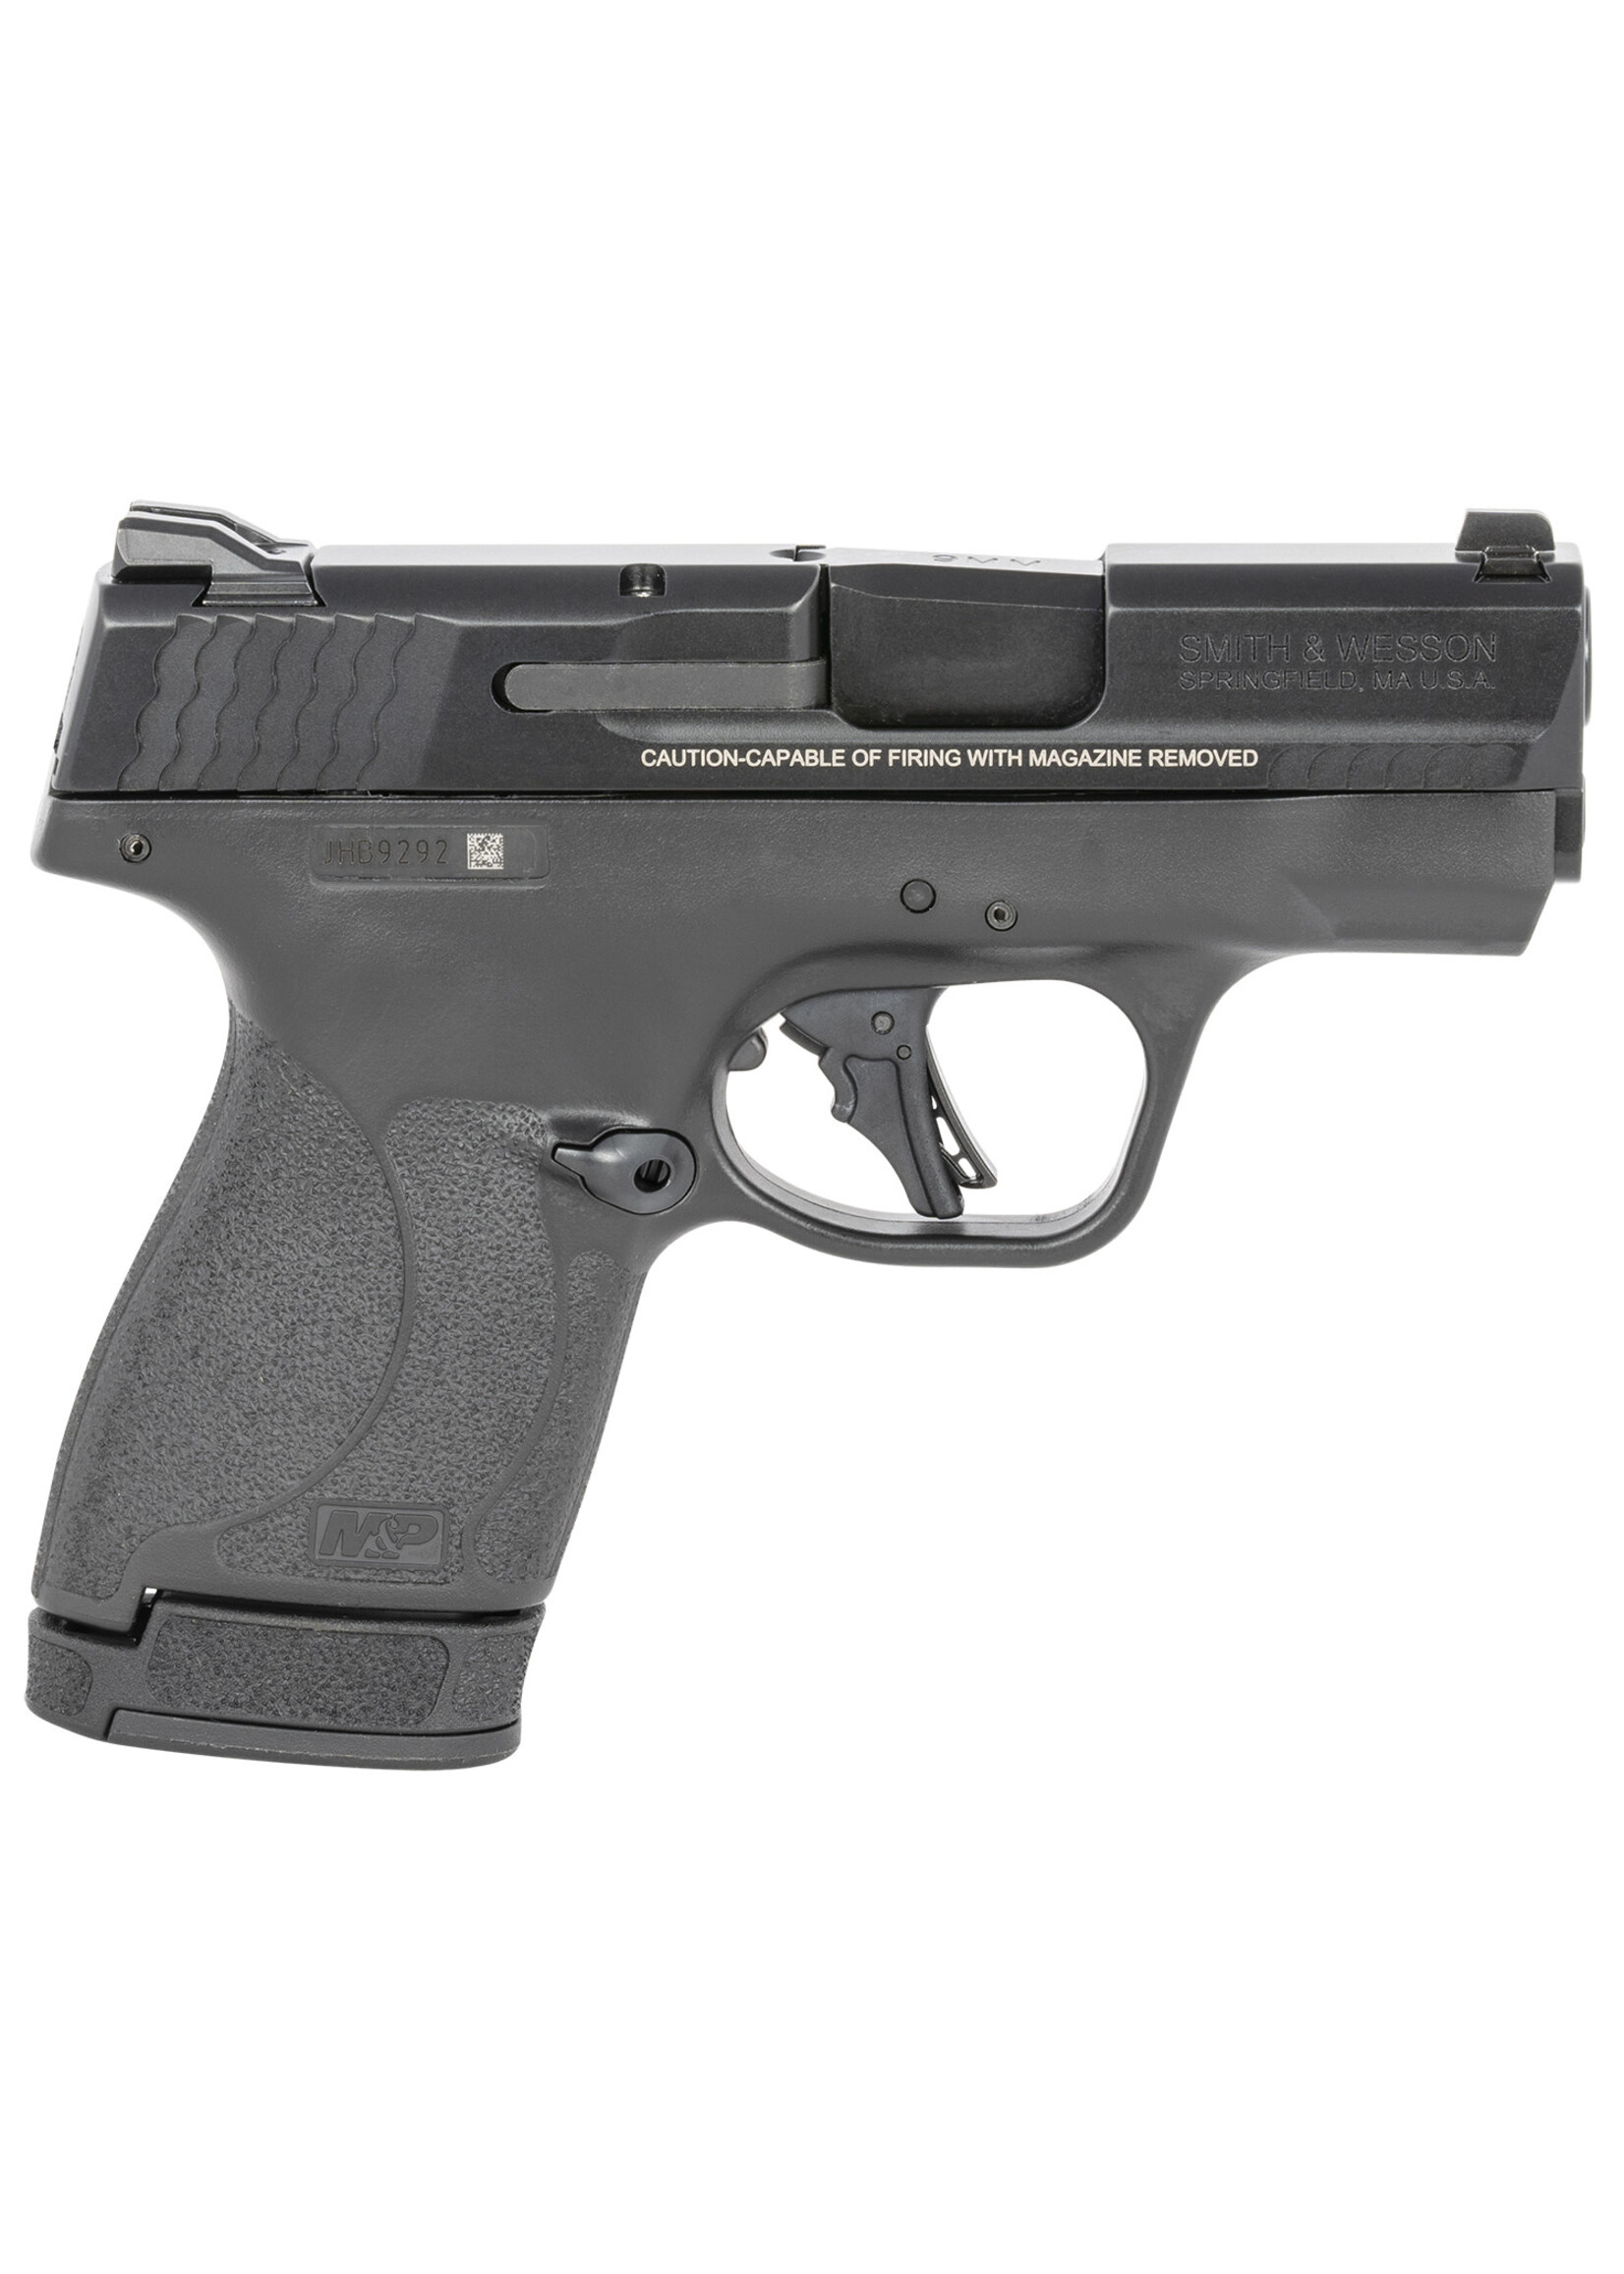 Smith and Wesson (S&W) Smith & Wesson M&P Shield Plus, 9mm, 3.10" 10+1,13+1 Matte Black Matte Black Armornite Stainless Steel Slide Black Polymer Grip, No manual Safety